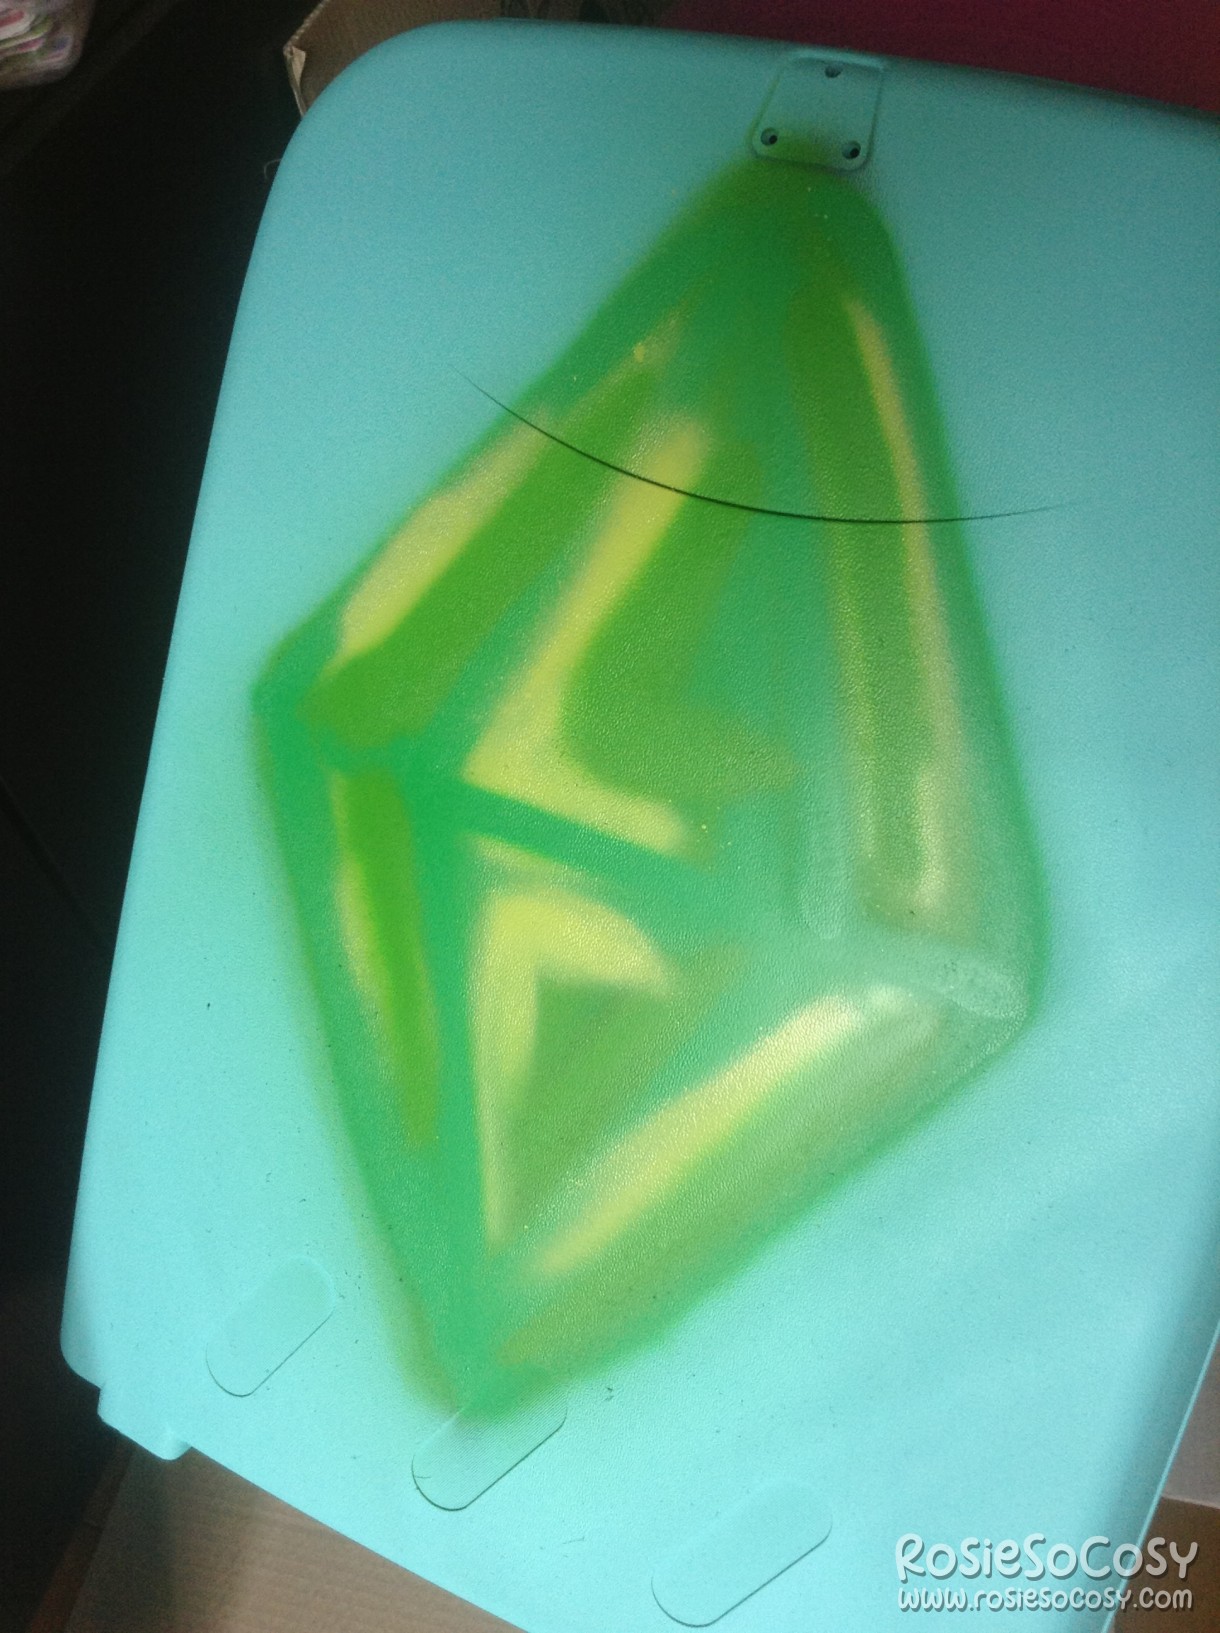 Part of a suitcase. The suitcase is a soft aqua colour. There's a big green graffiti plumbob on it.